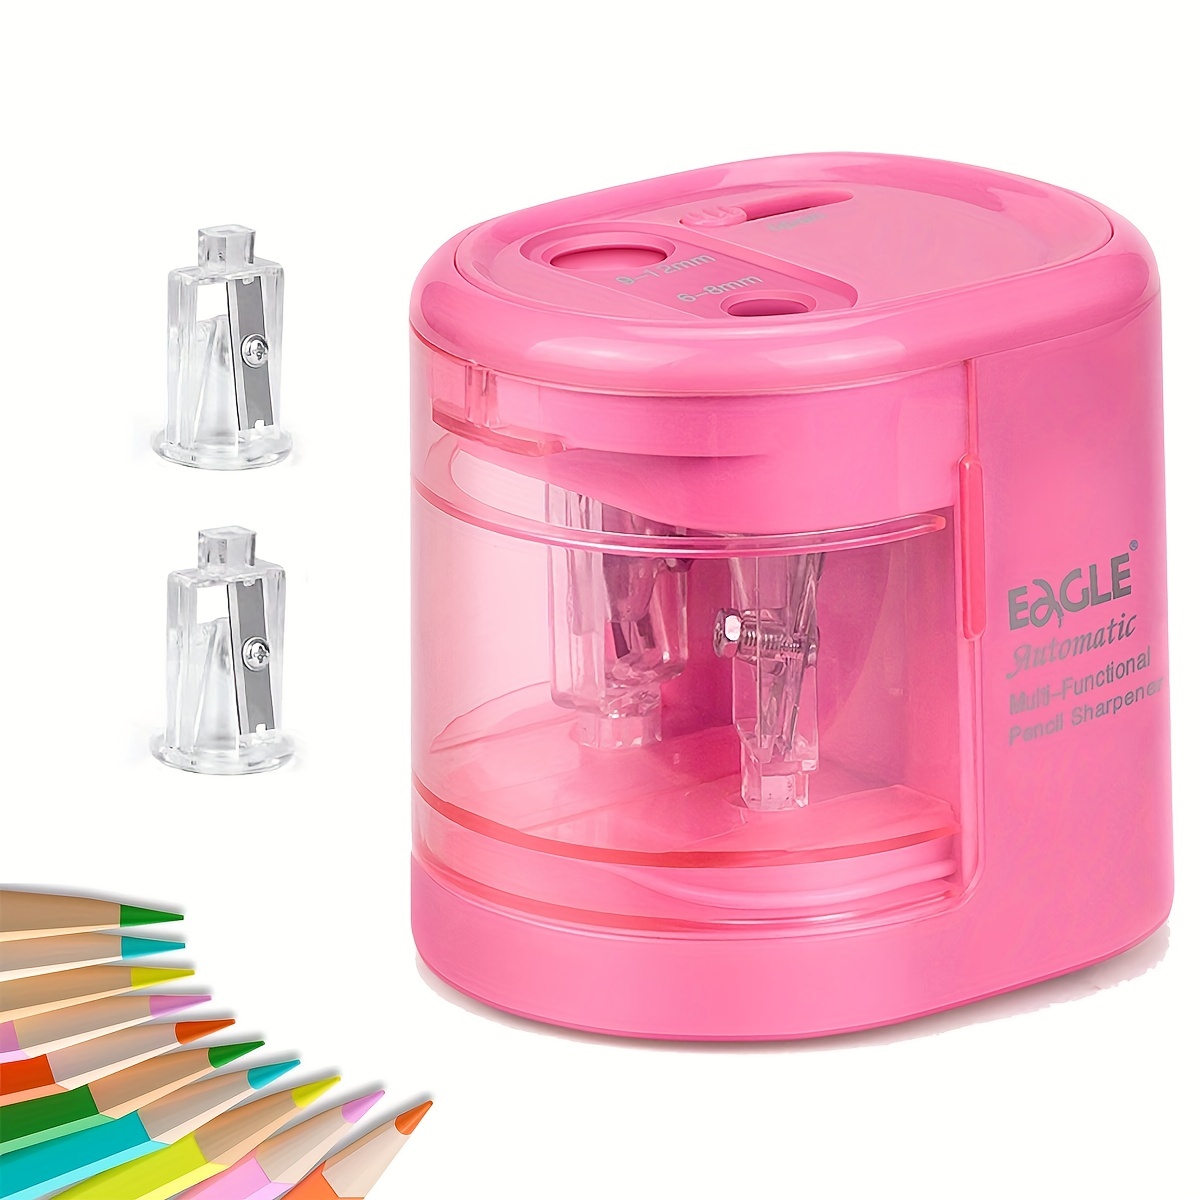 

Eagle Electric Pencil Sharpener, Battery Or Usb Operated, Dual Blades, Automatic Pencil Sharpener For Home Office, Fit For Pencils Of Size 6-8mm And 9-12mm